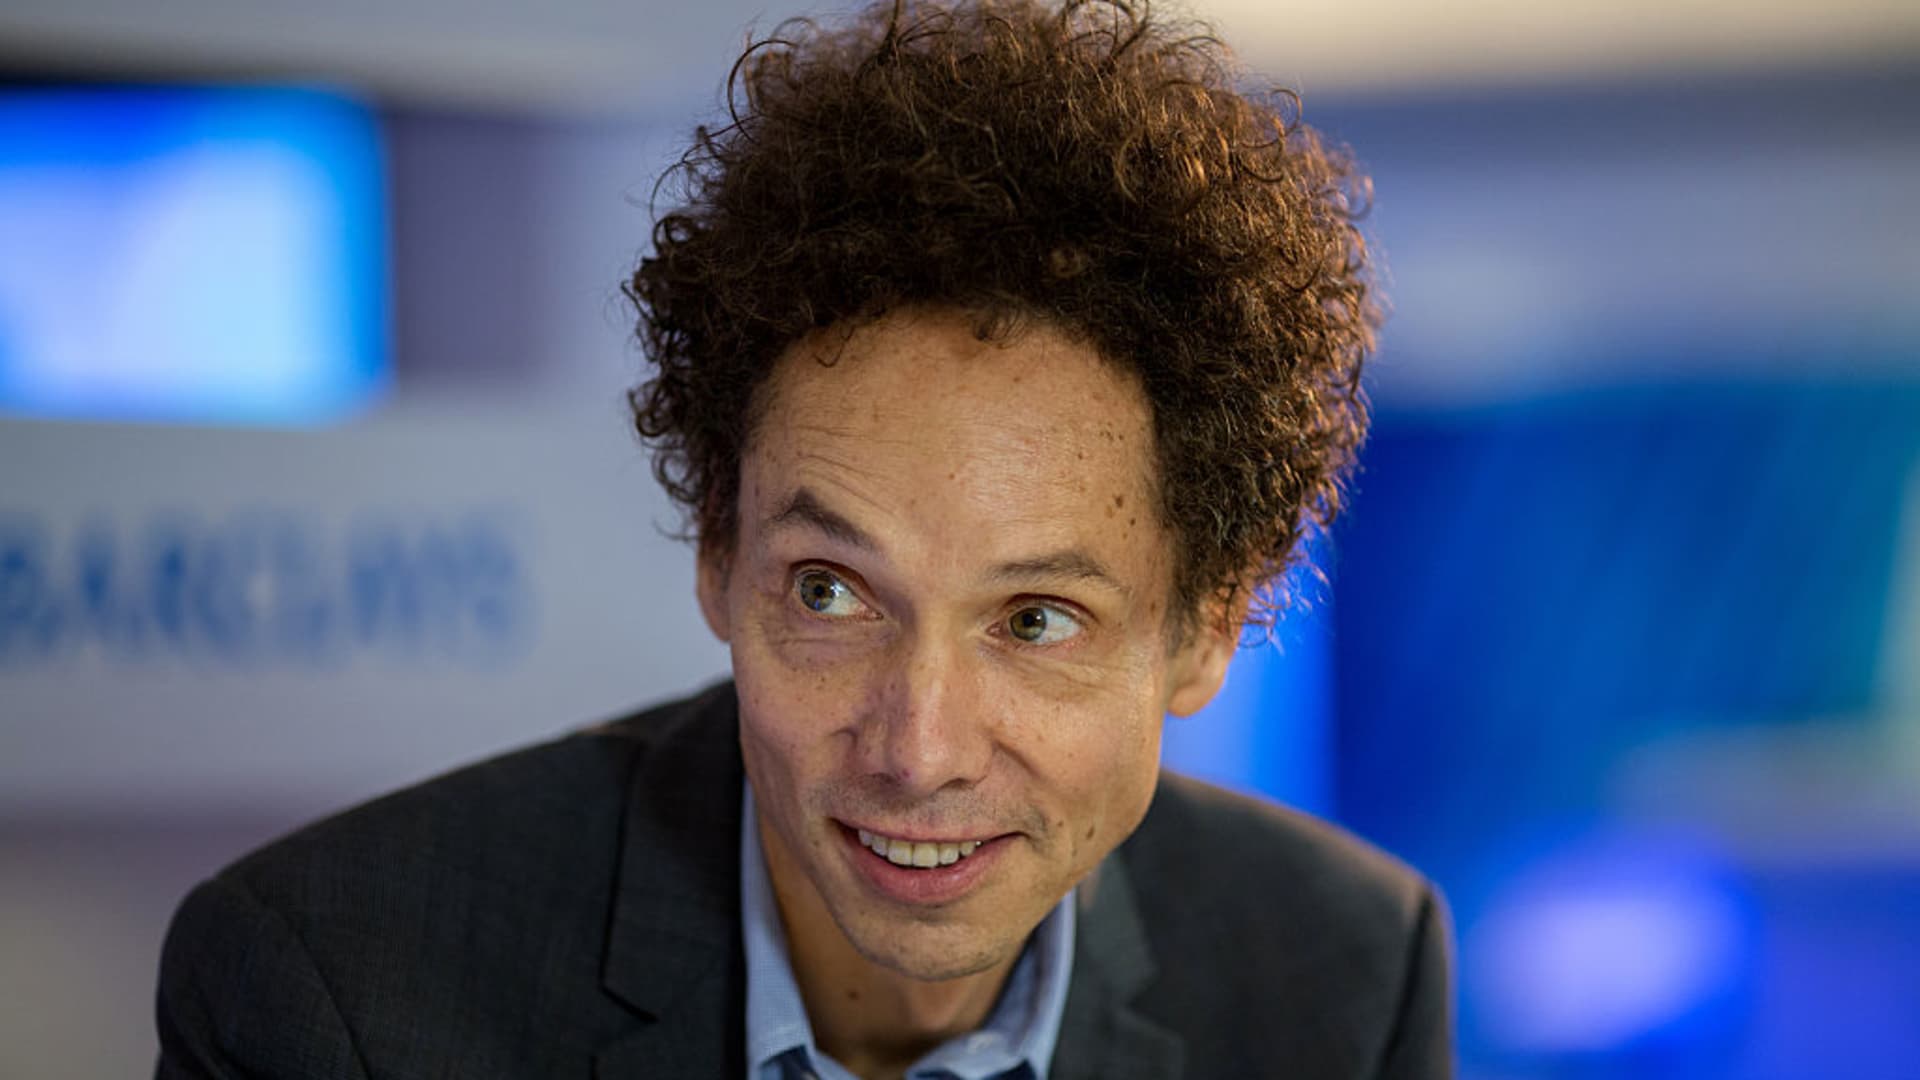 Malcolm Gladwell, addressing criticism: 'Solitary work' can be done at home but for creative work, 'offices really do matter' - CNBC